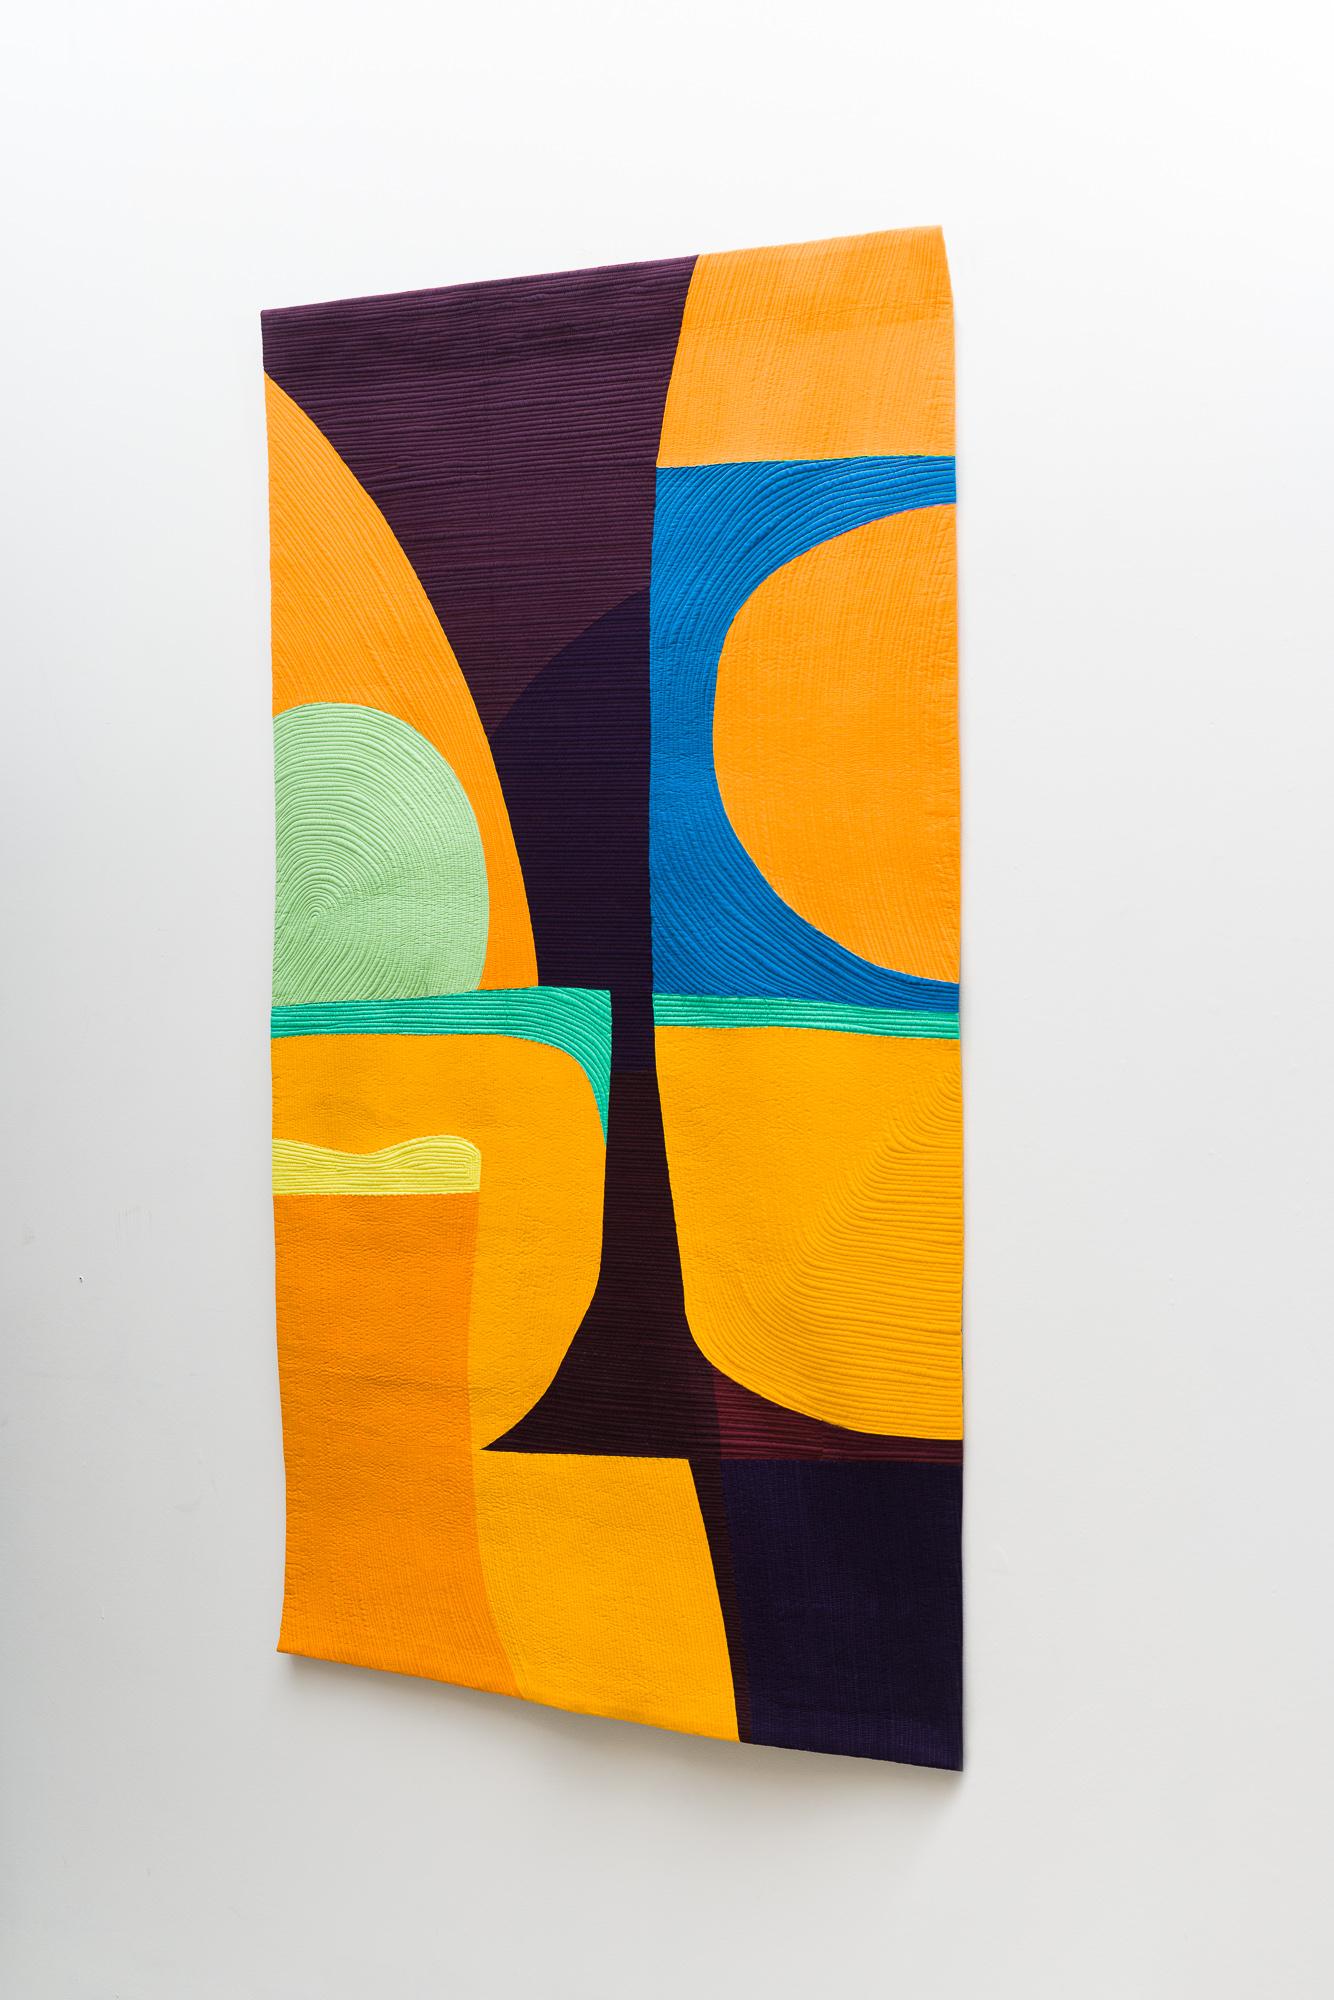 By taking ordinary pieces of cotton and transforming them into forceful collages of luminous color, contemporary textile artist Gerri Spilka brings together disparate elements of quilting, modern abstraction, and human interaction to re-imagine work